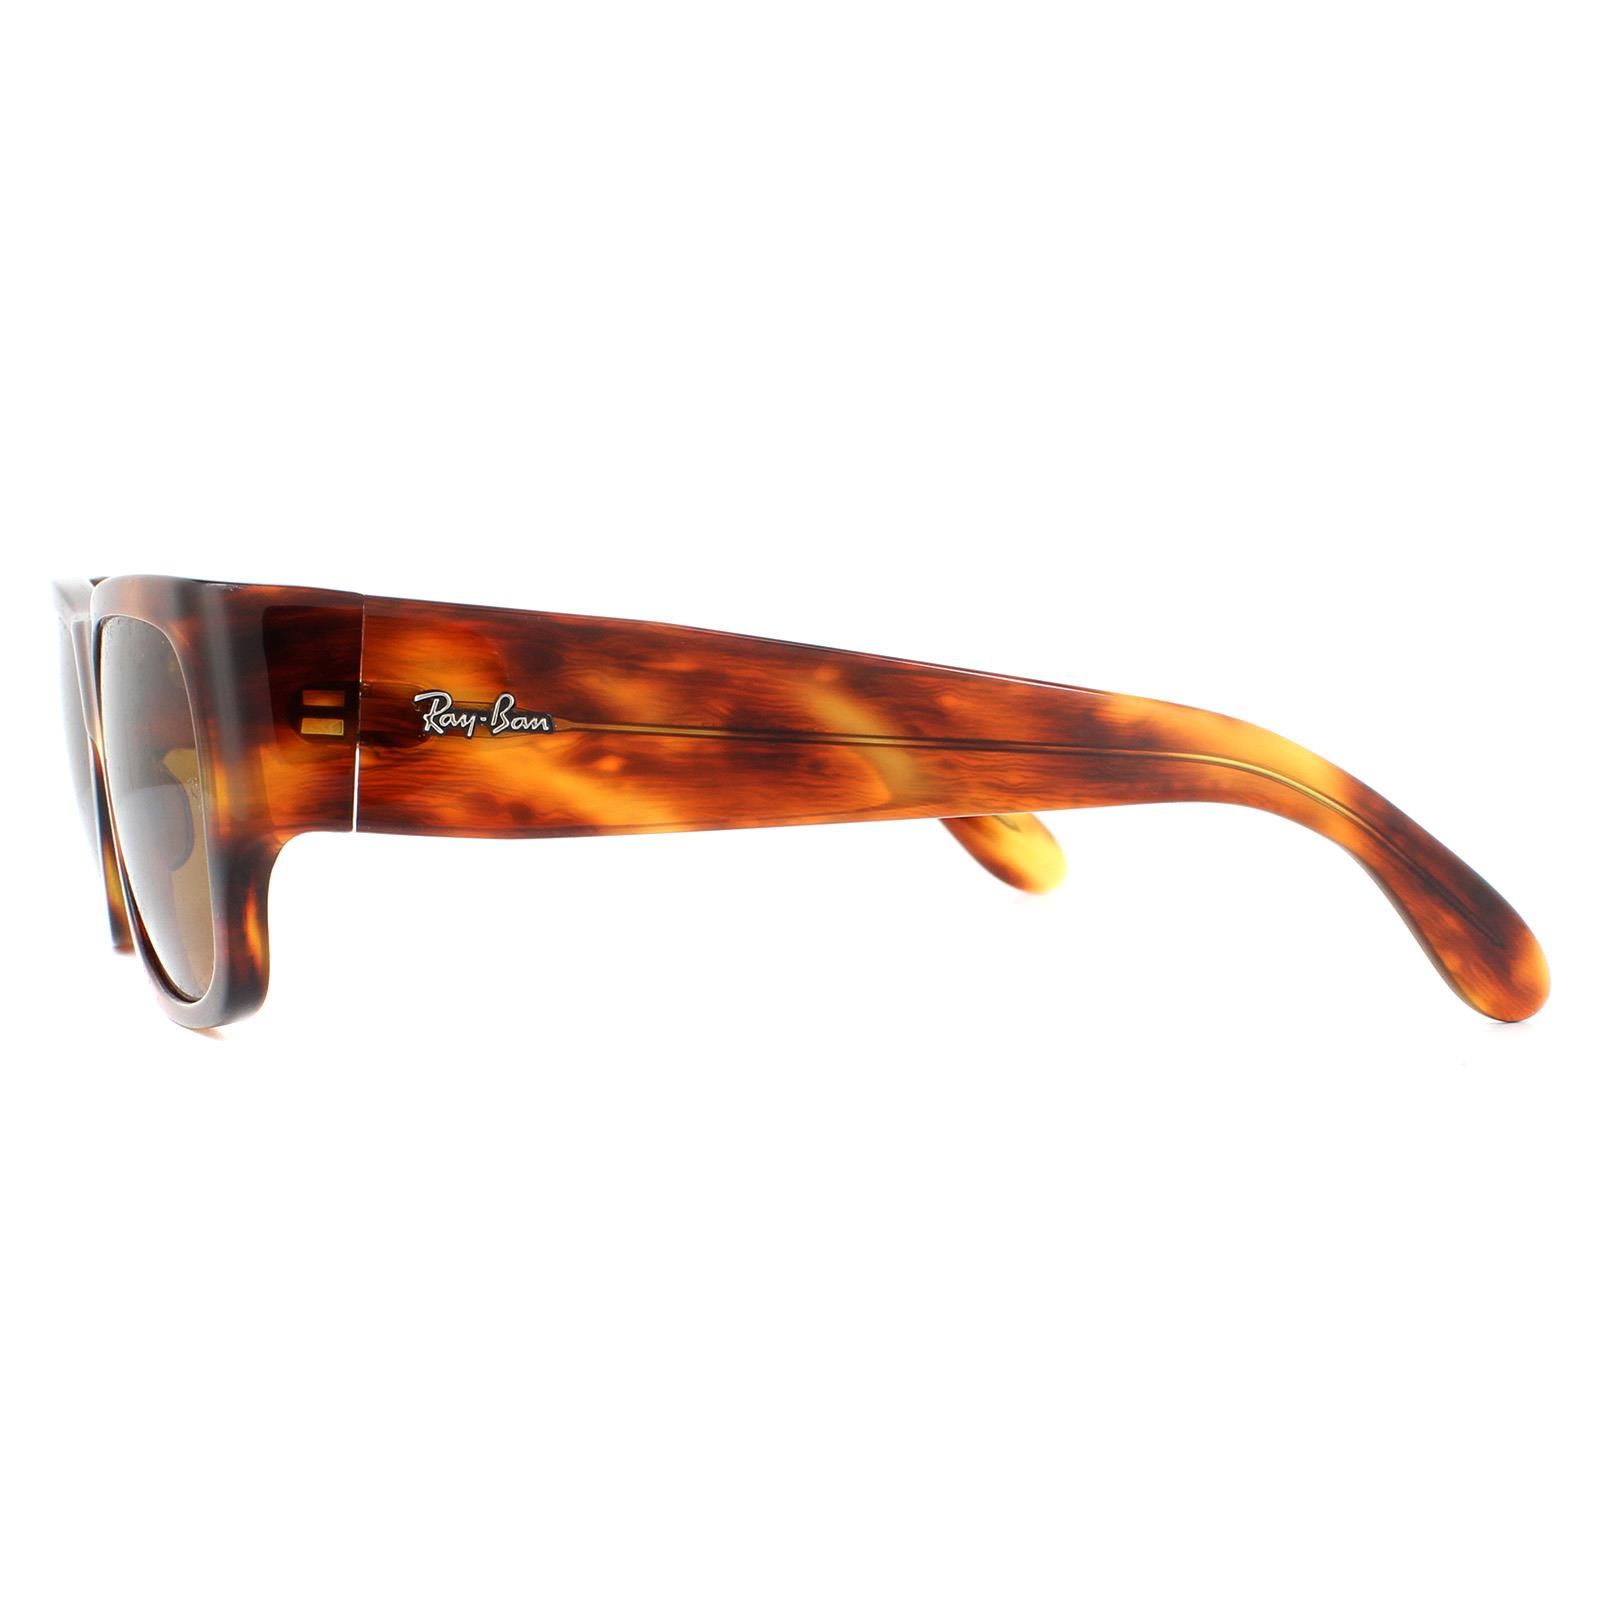 Ray-Ban Sunglasses Nomad RB2187 954/33 Striped Havana Brown B-15 are a bold style originally from the 70's featuring distinctive square lenses and super thick temples embellished with the Ray-Ban logo.